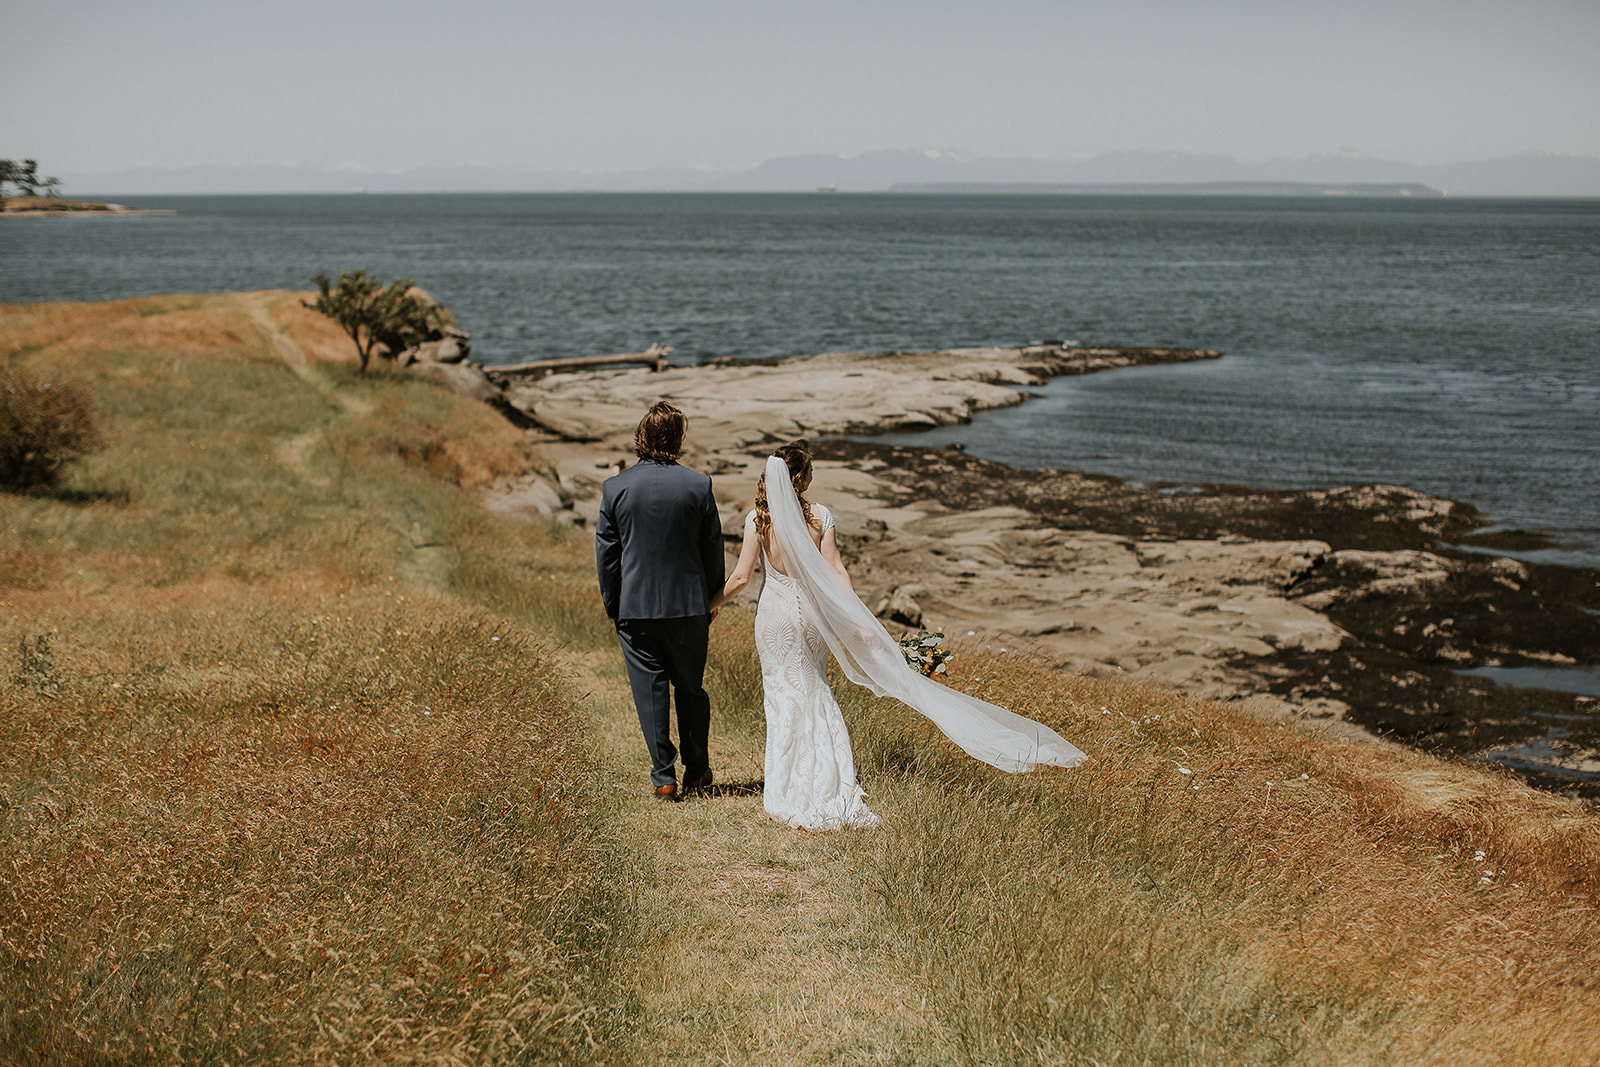 A bride and groom walk away down a path through a field holding hands 